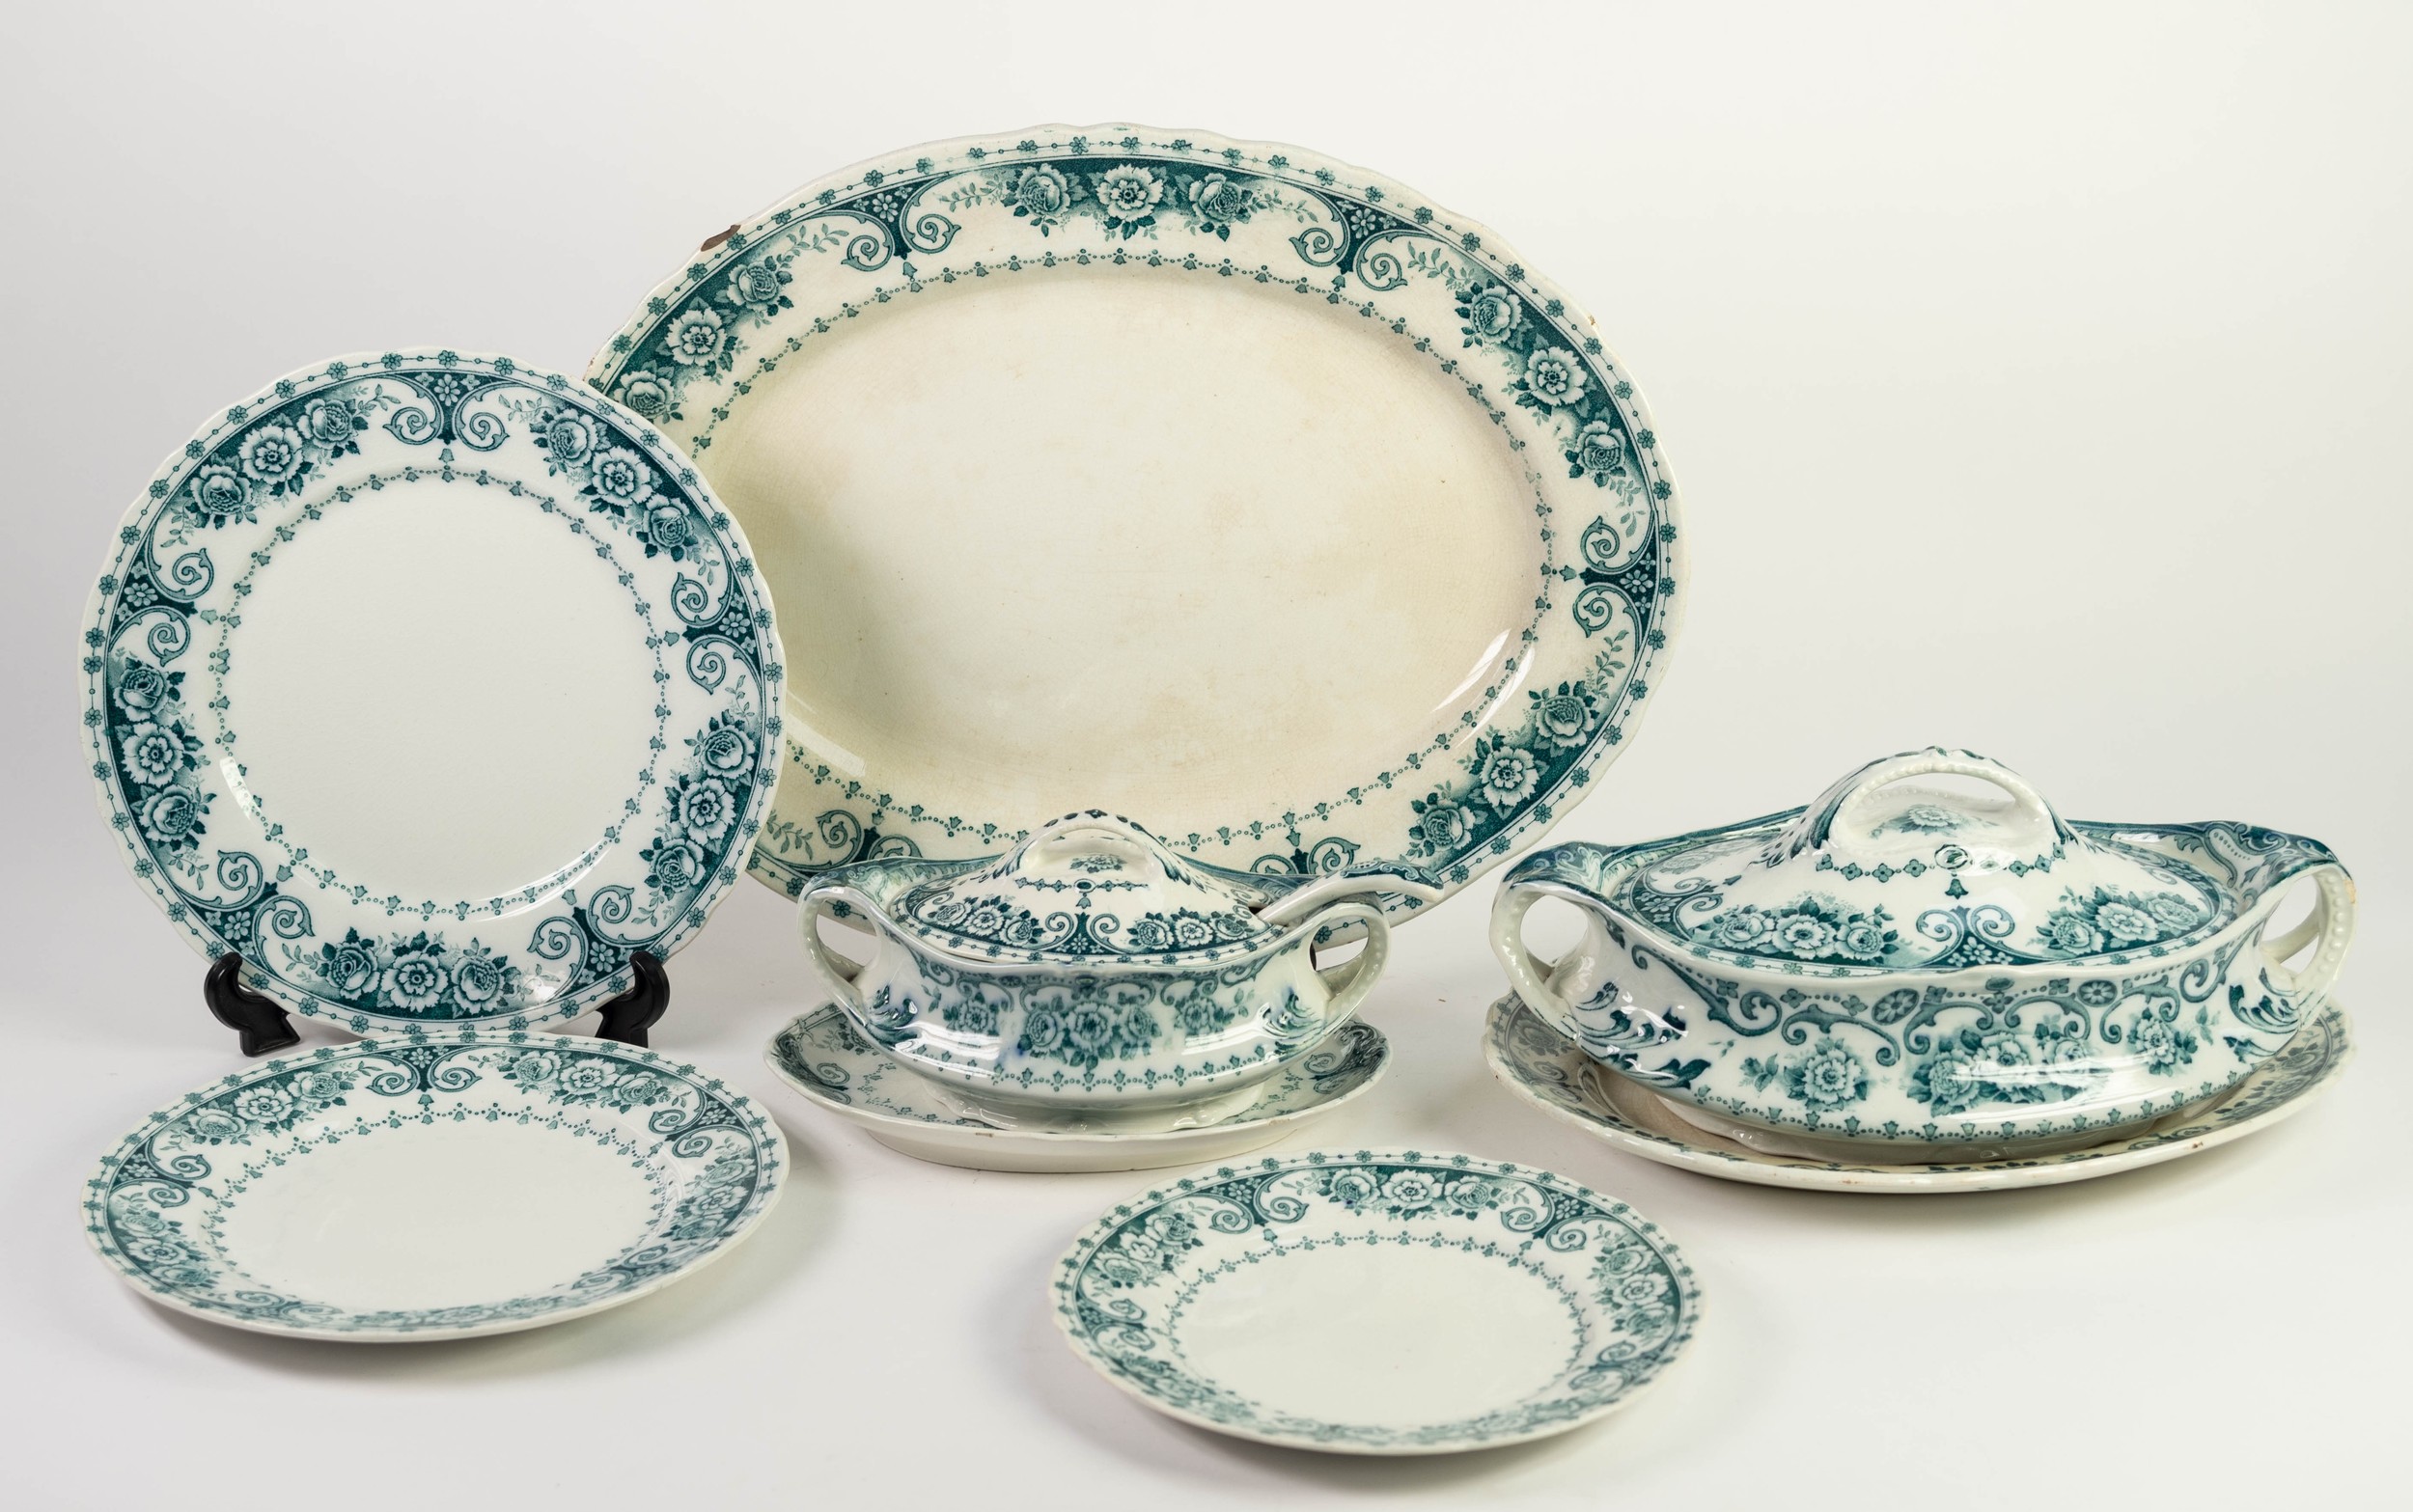 T. RATHBONE & Co. EARLY 20th CENTURY ART NOUVEAU DESIGN POTTERY DINNER SERVICE, for six persons,